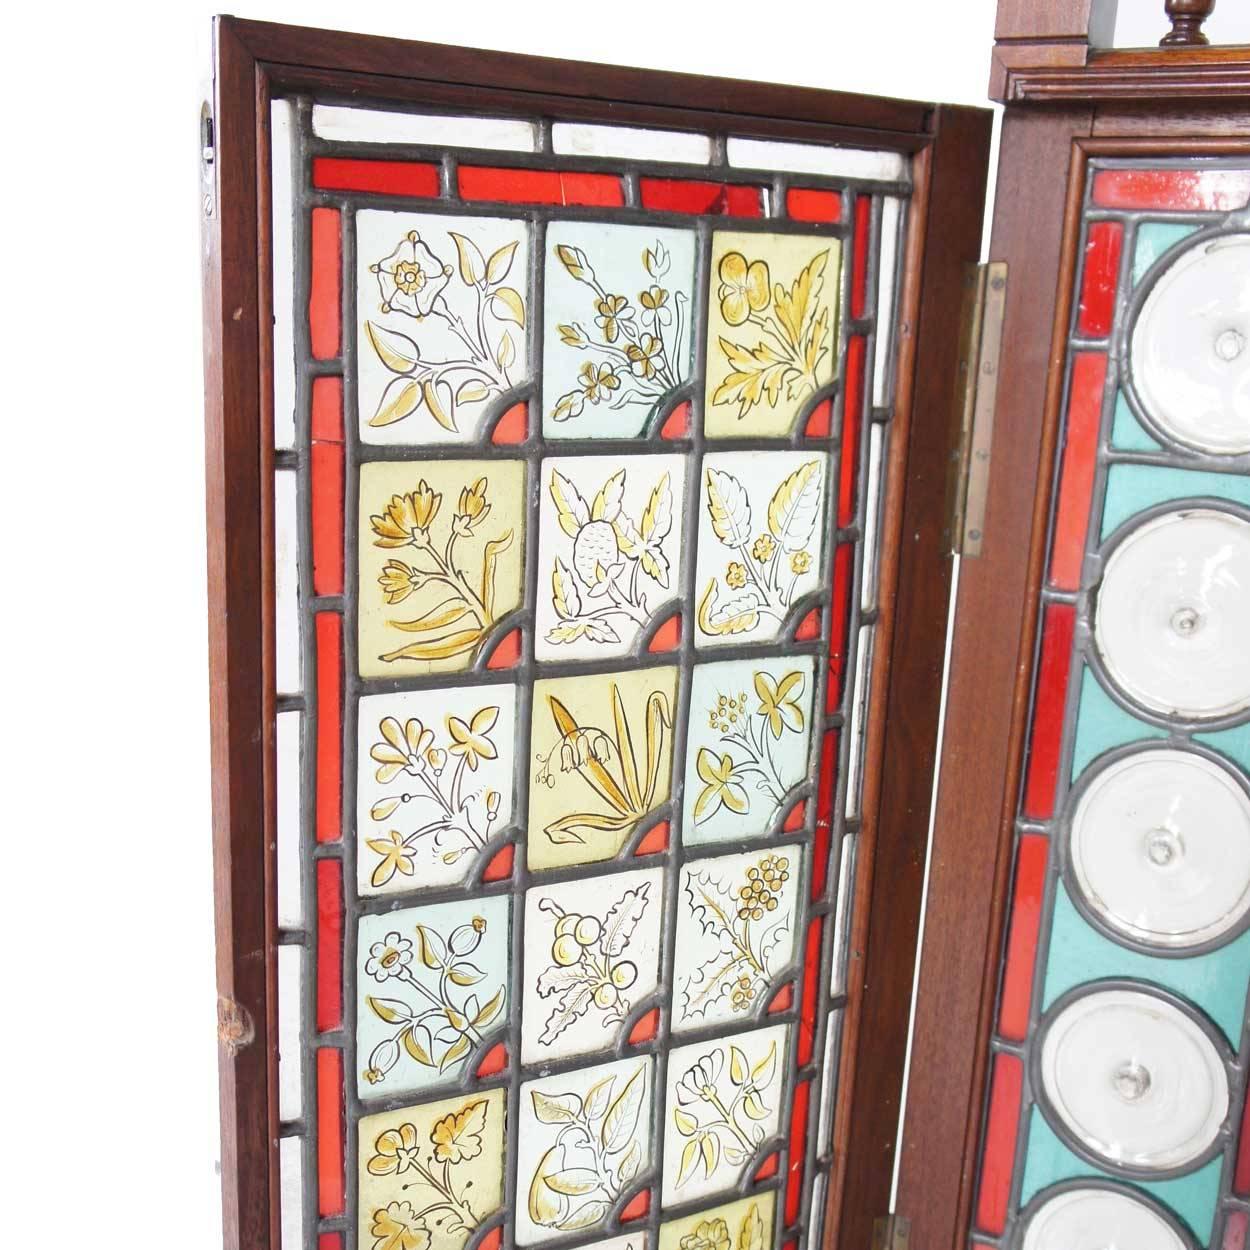 Early 20th Century English Cox & Sons Arts and Crafts Stained Glass and Walnut Fireplace Screen